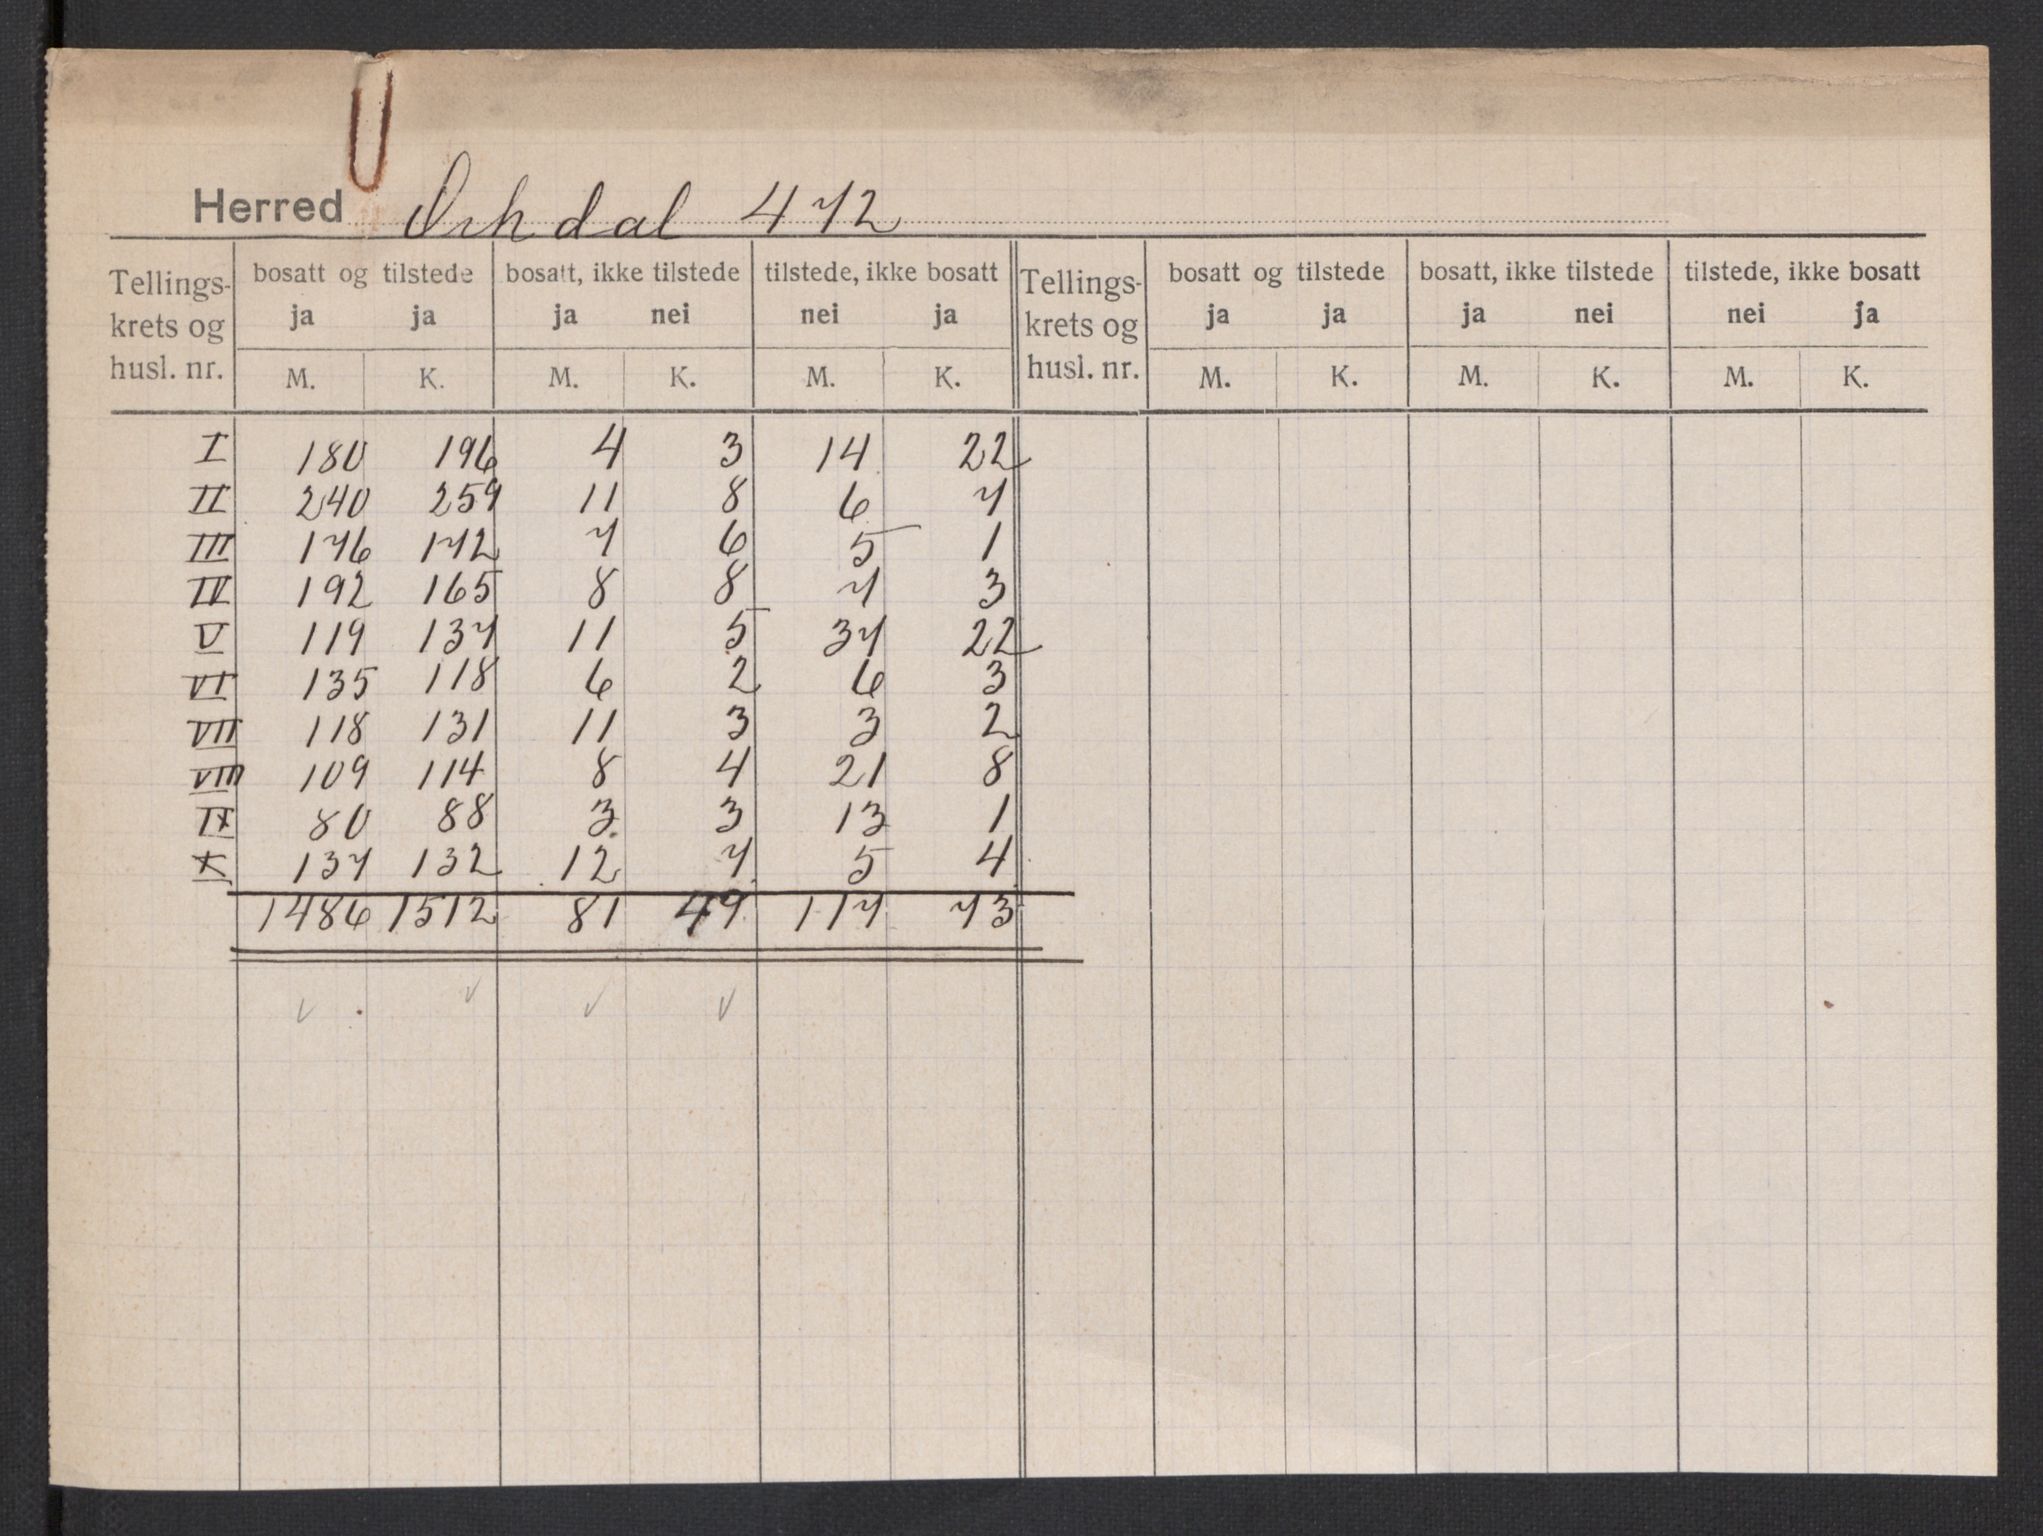 SAT, 1920 census for Orkdal, 1920, p. 2